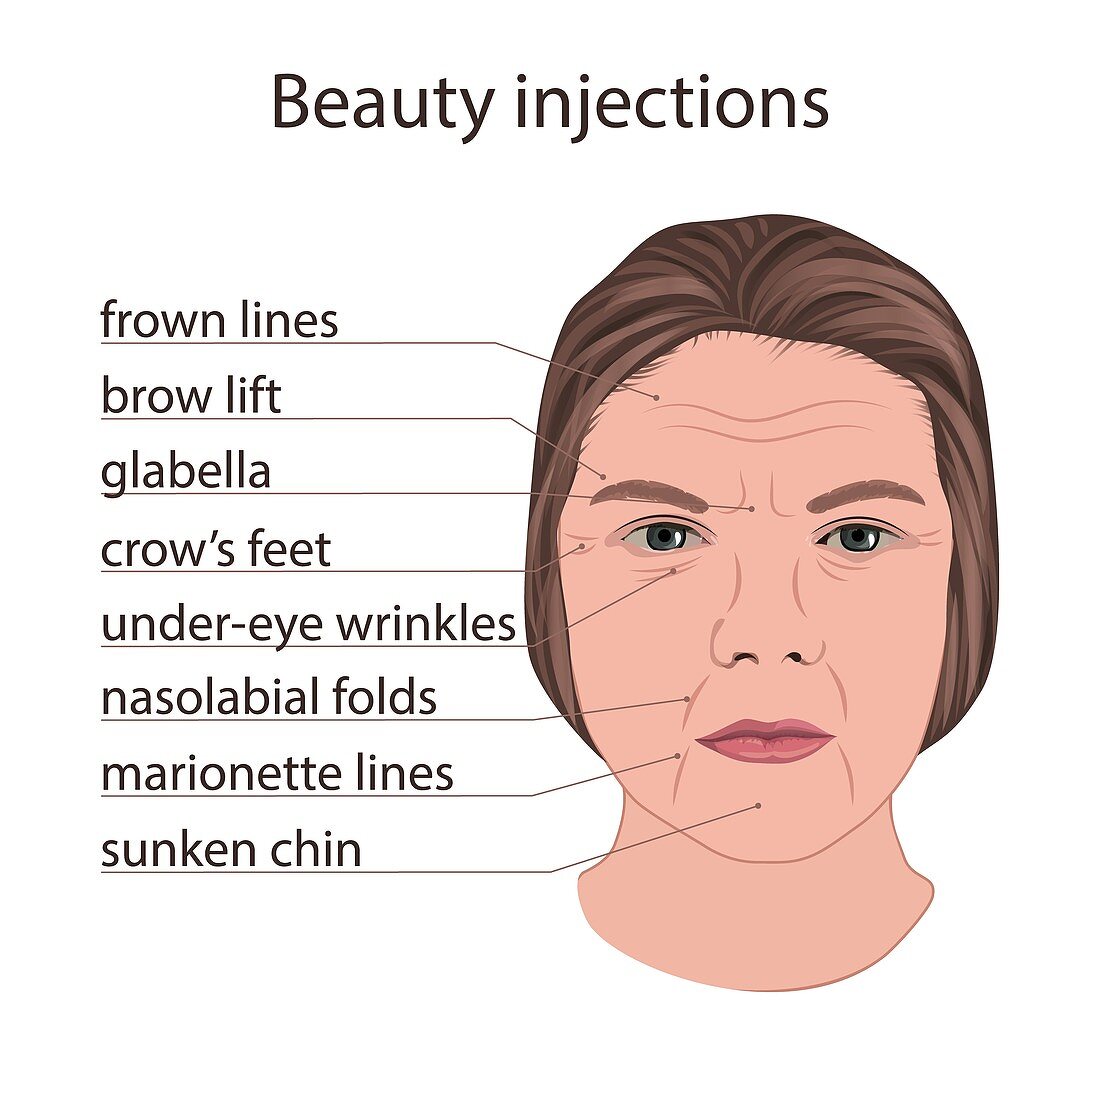 Scheme for beauty injections, illustration